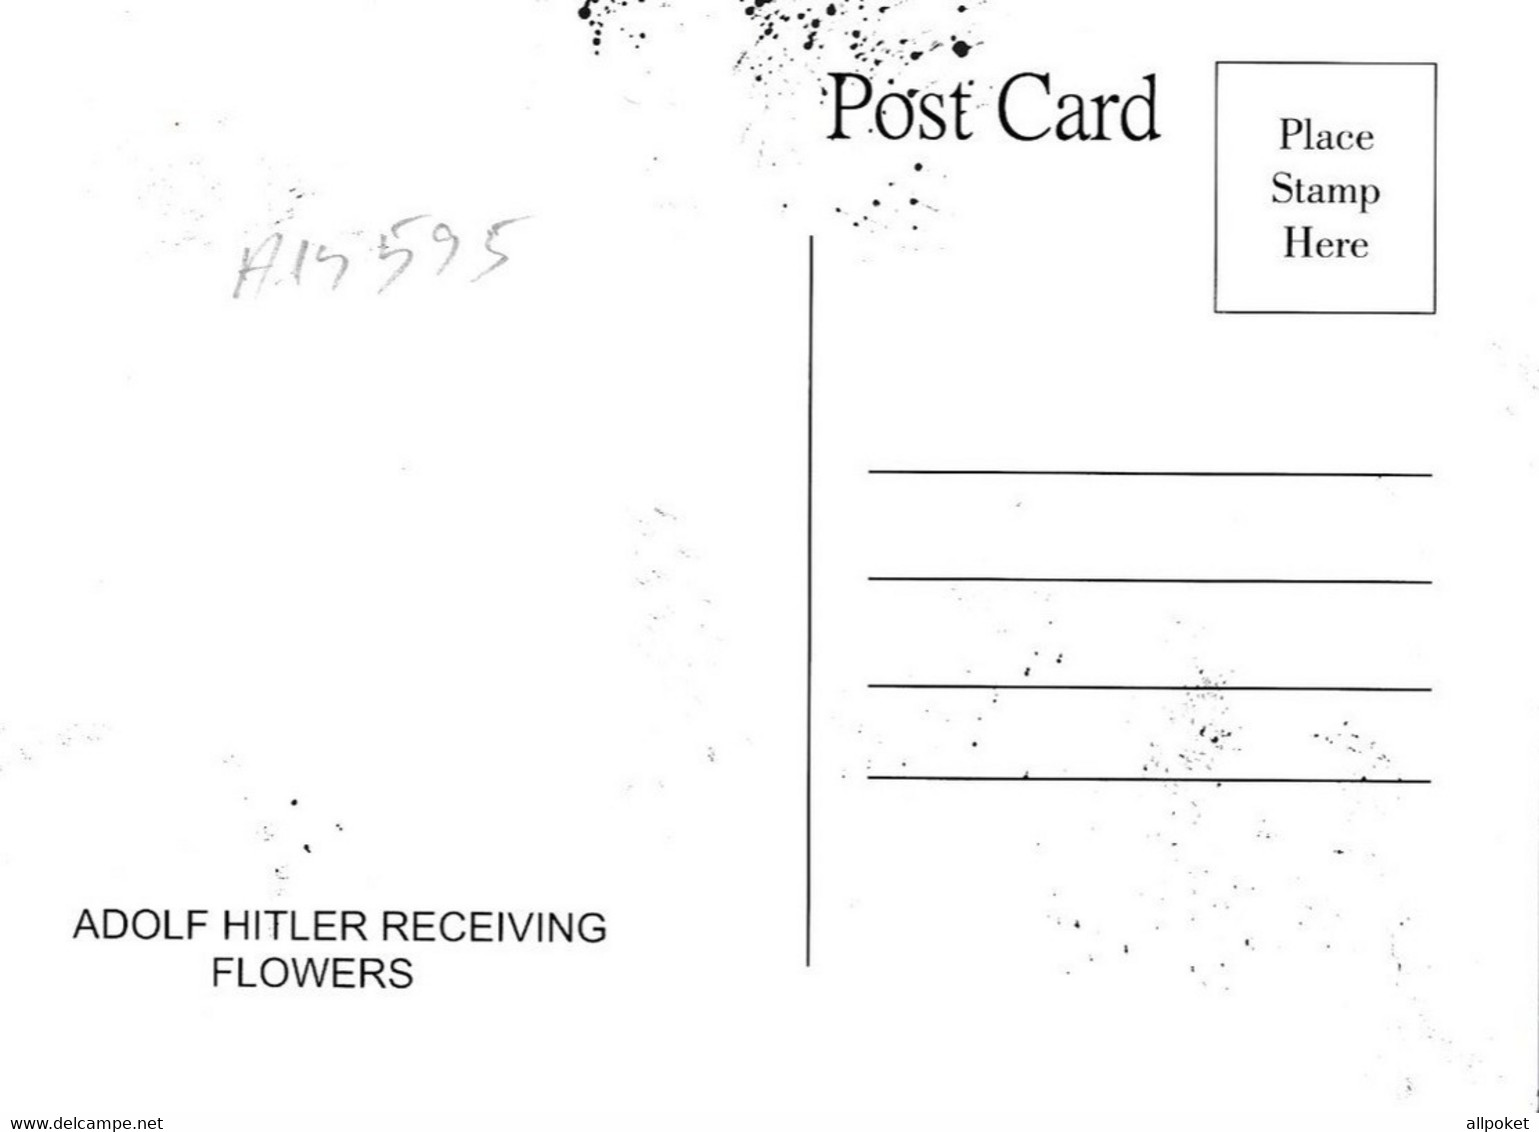 A14595 - DICTATOR GERMANY ADOLF HITLER RECEVING FLOWERS   POSTCARD - Personnages